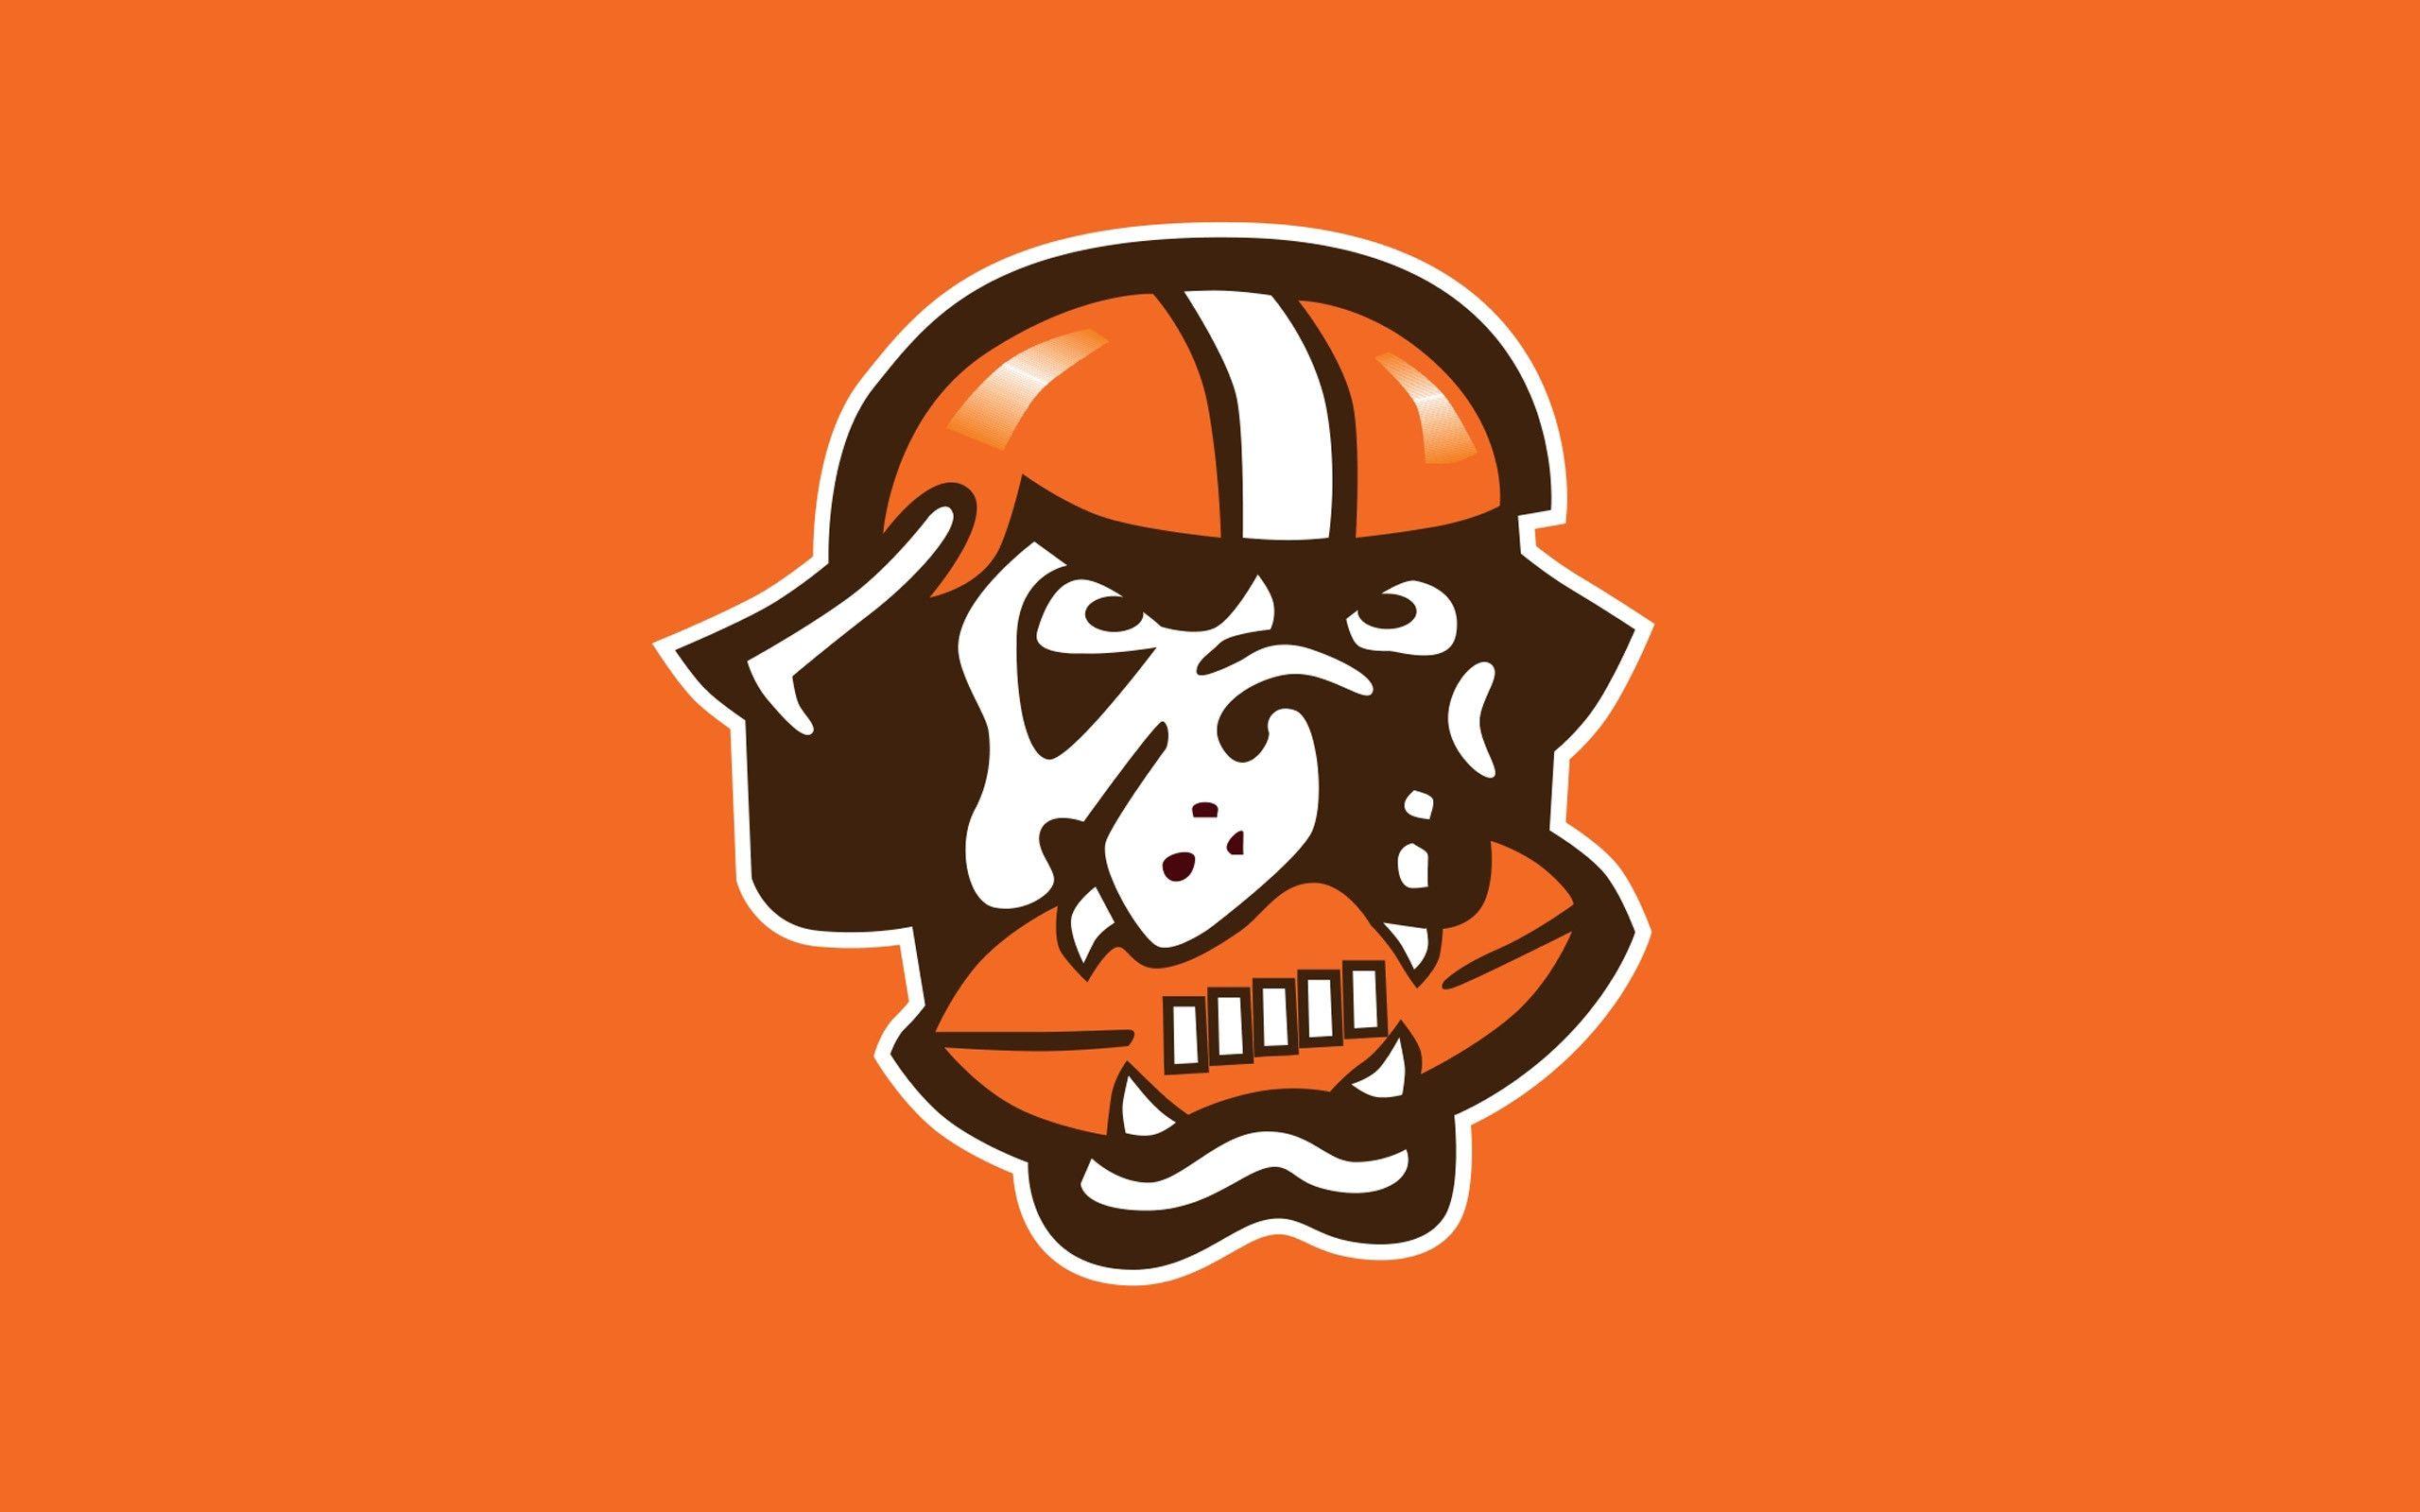 Cleveland Browns 2014 NFL Logo Wallpaper Wide or HD. Sports